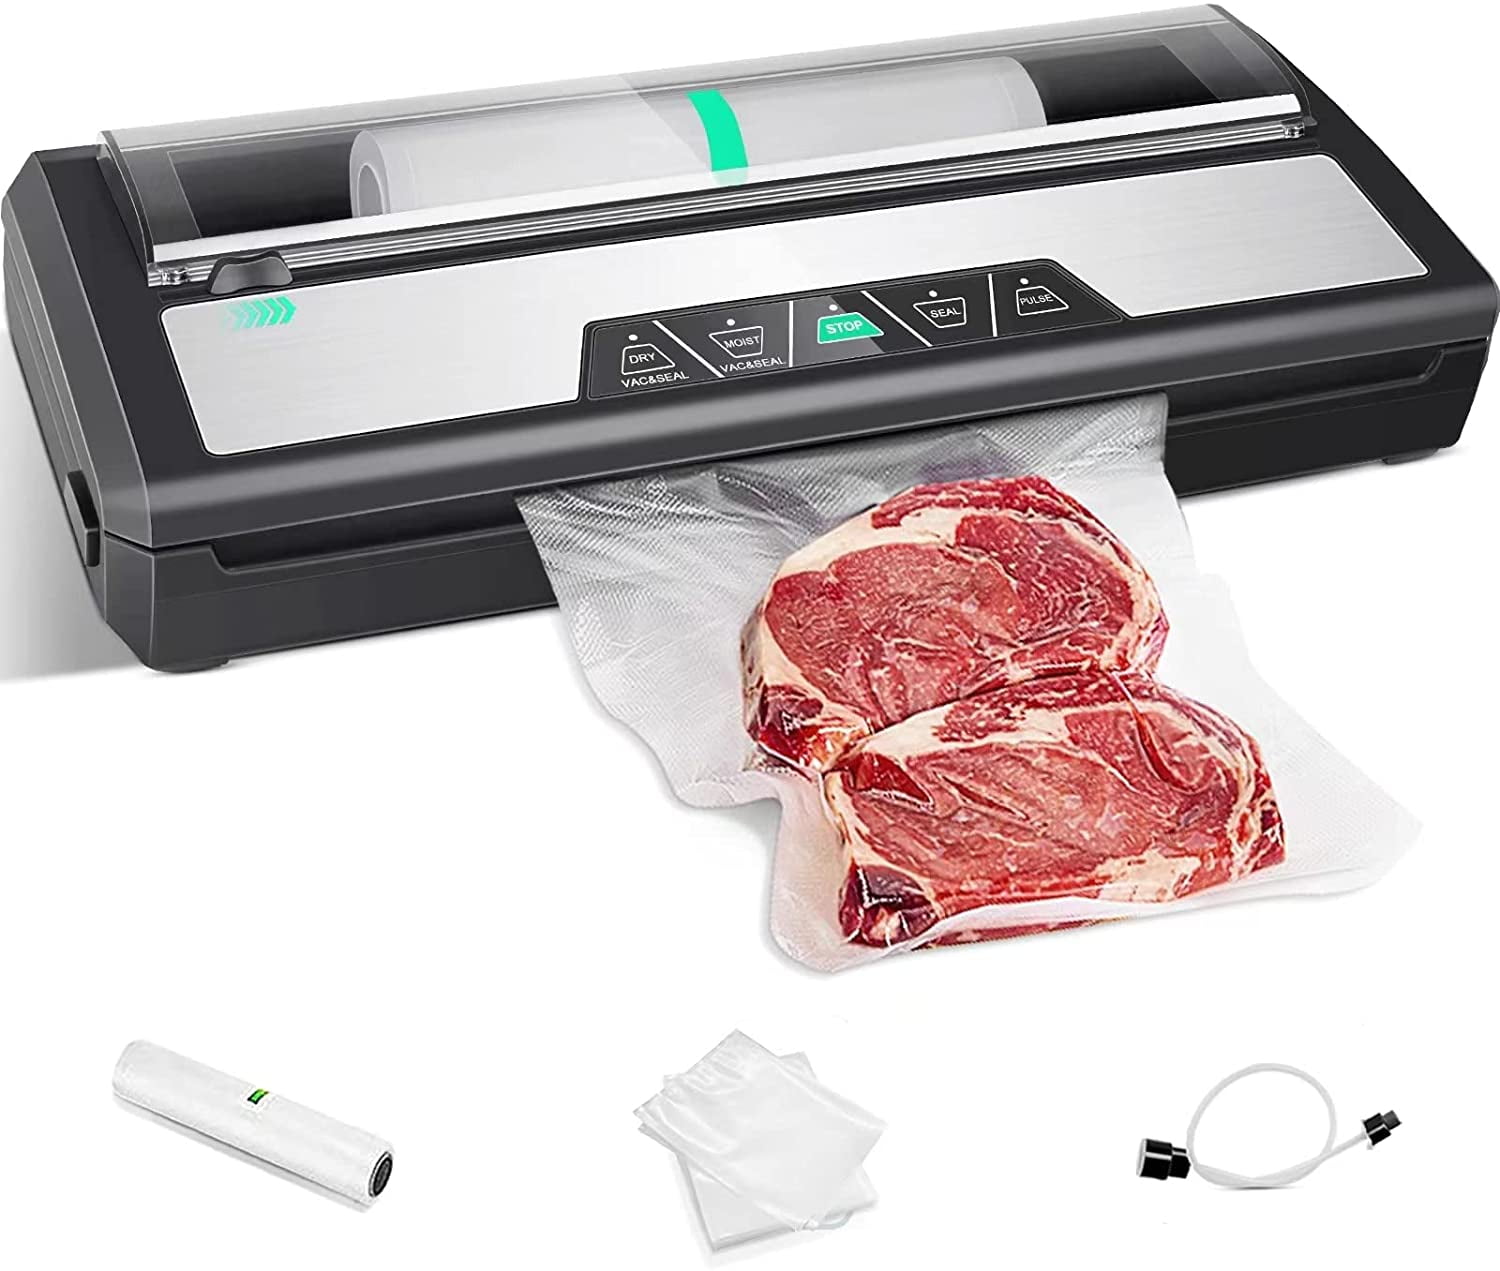 Vacuum Sealer with Built-in Roll Storage & Cutter, Automatic Dry/Moist Food  Saver w Starter Bags, - Small Kitchen Appliances - Albany, New York, Facebook Marketplace